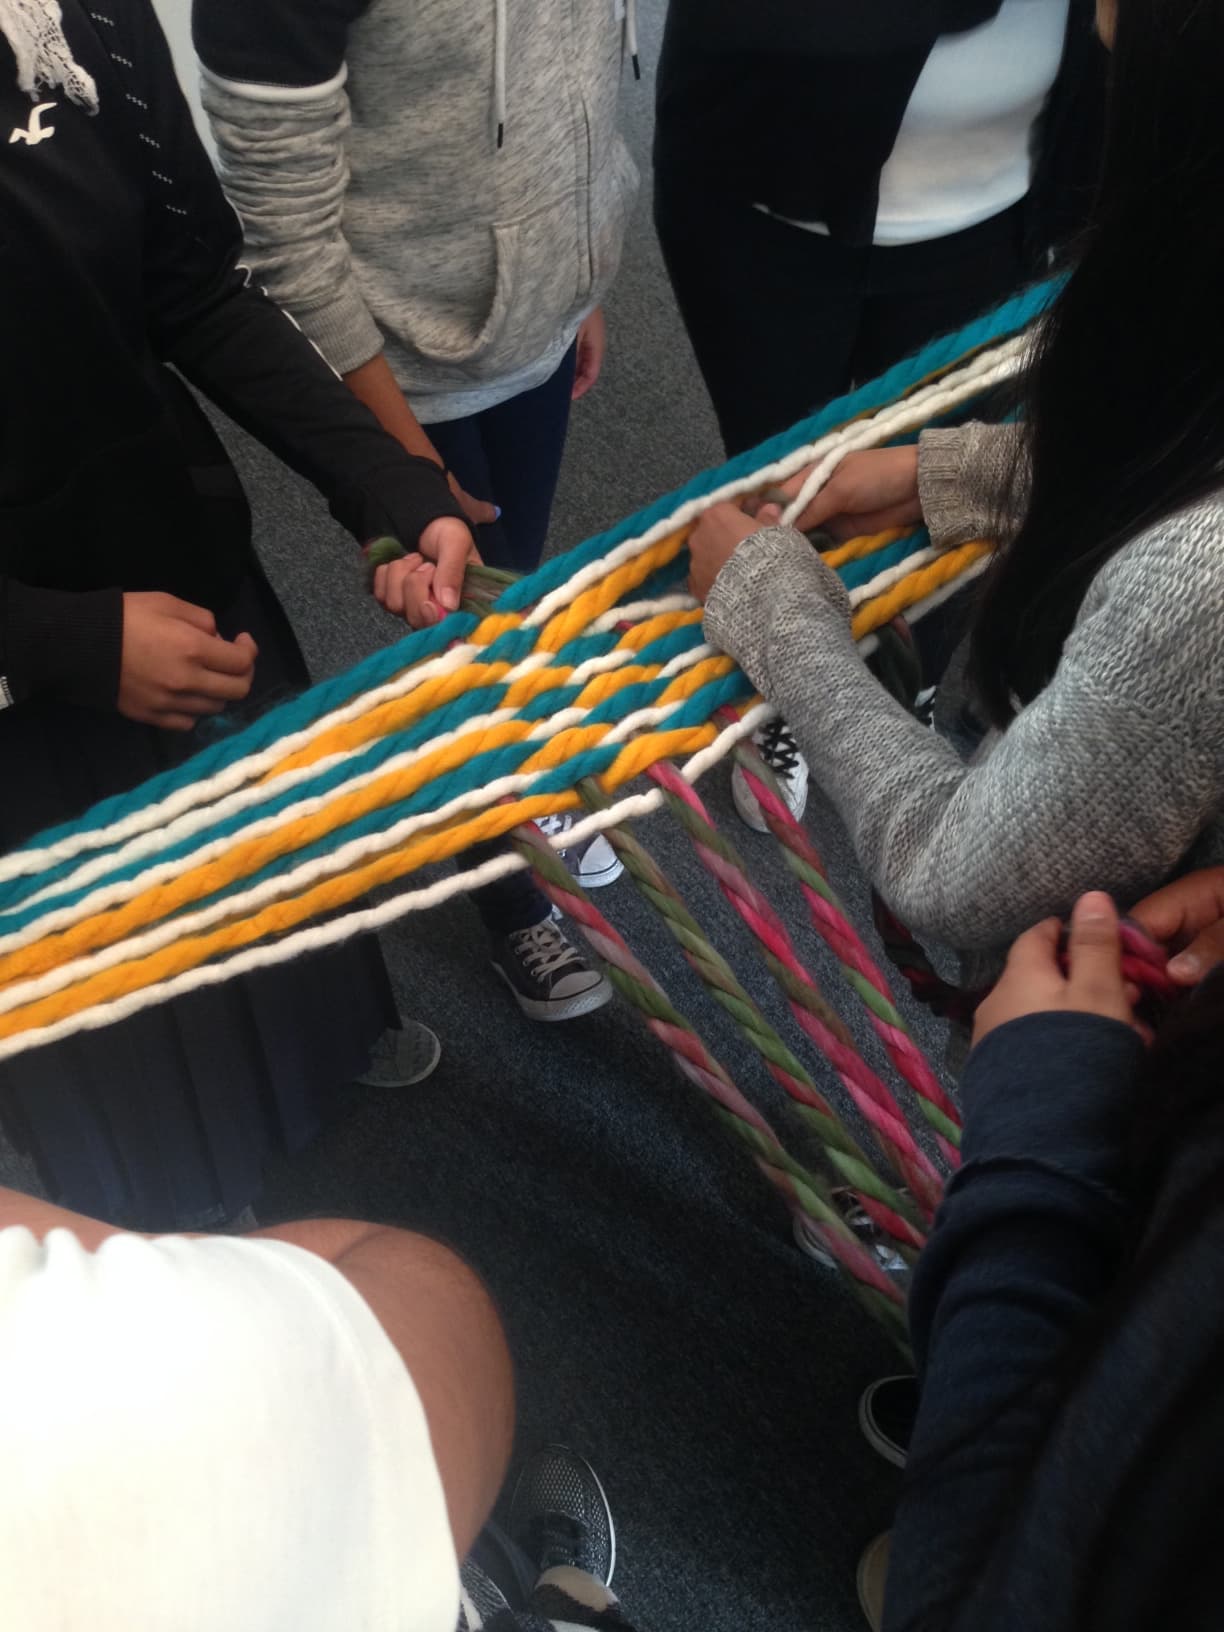 Large human weaving project